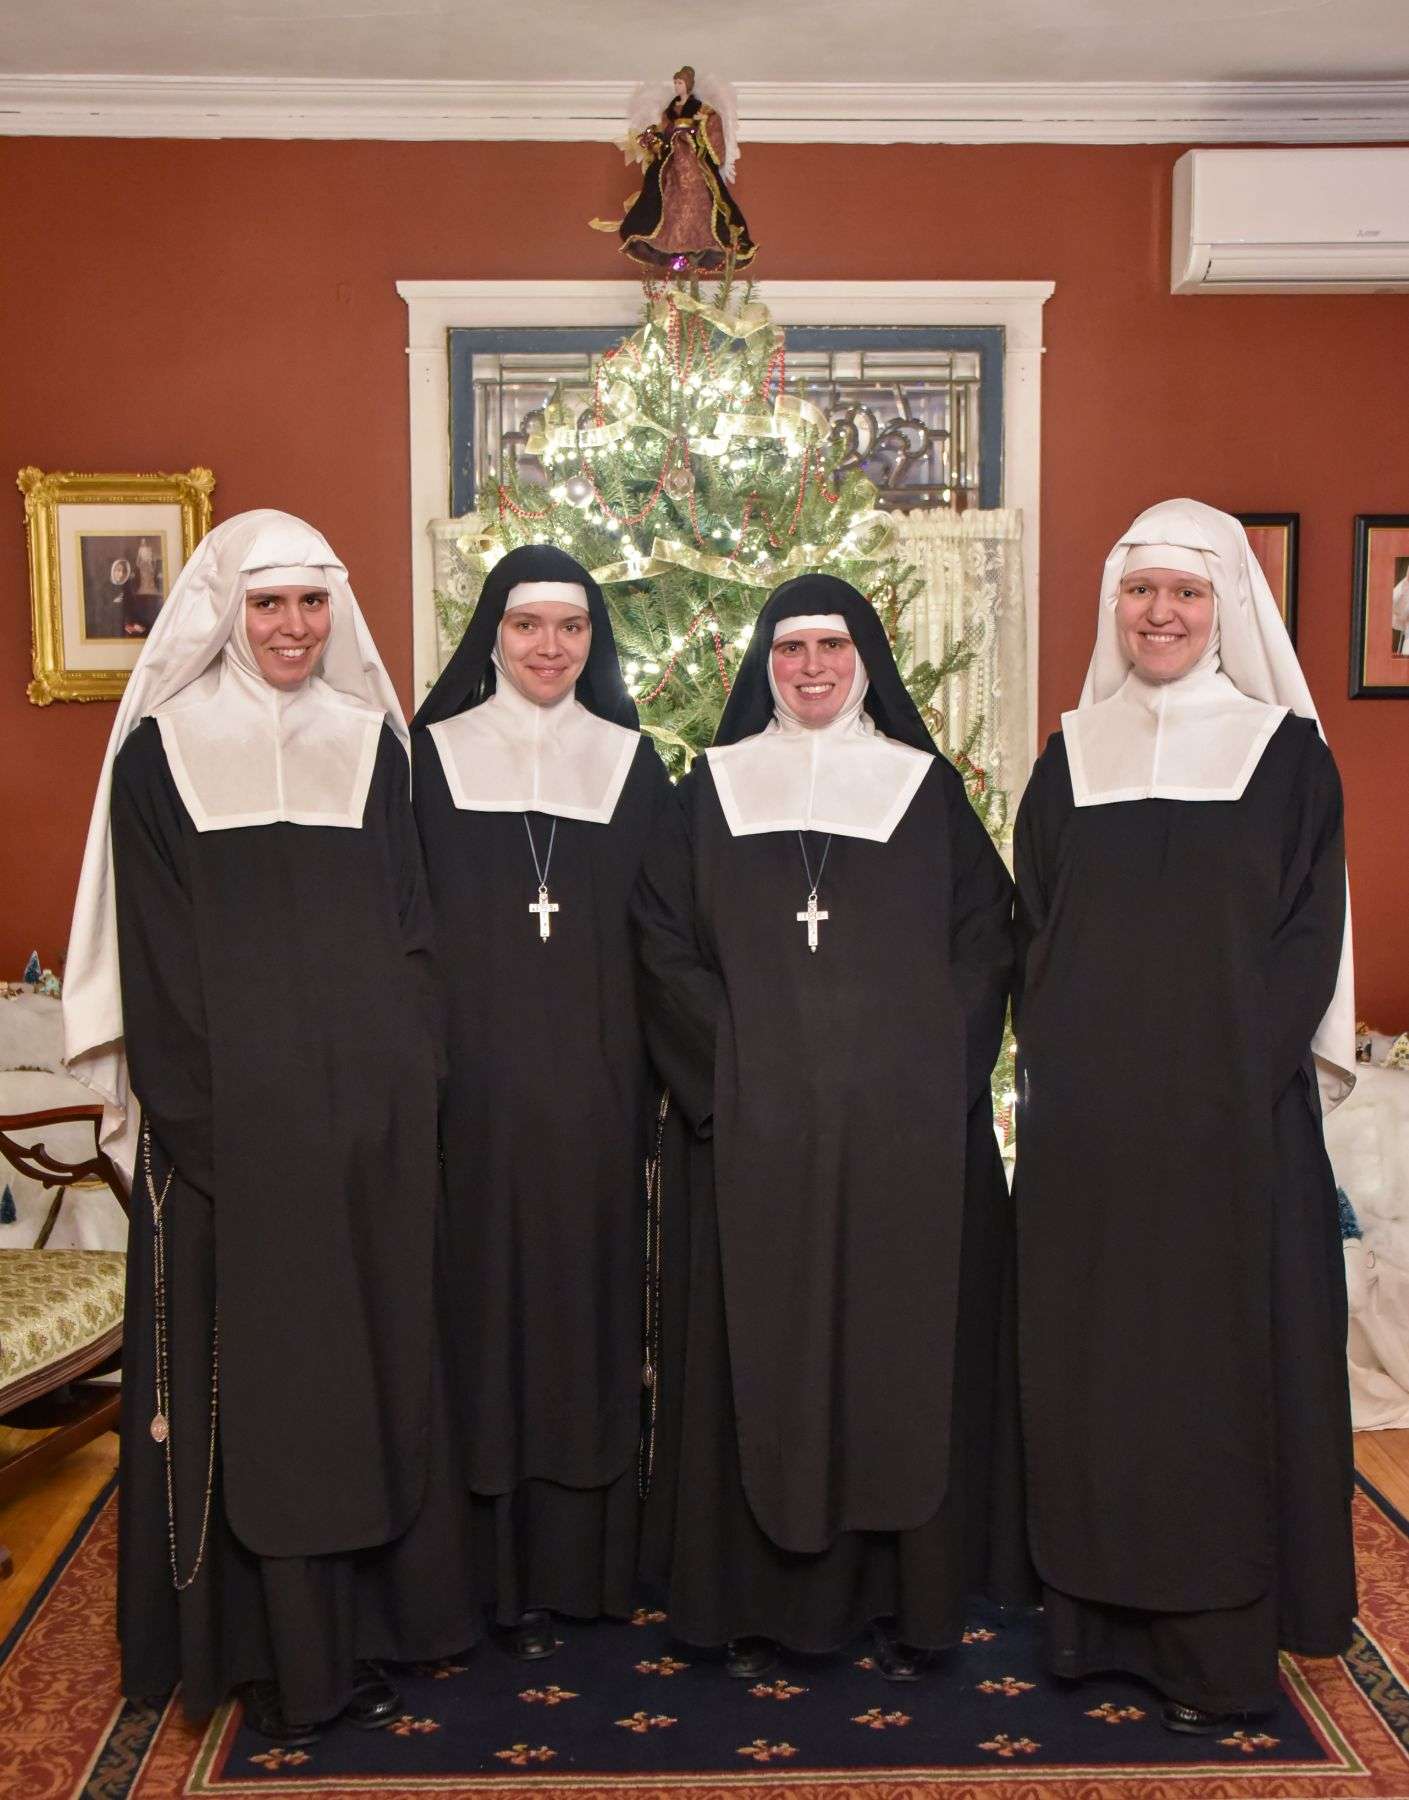 From the Sister Adorers: Christmas Greetings!